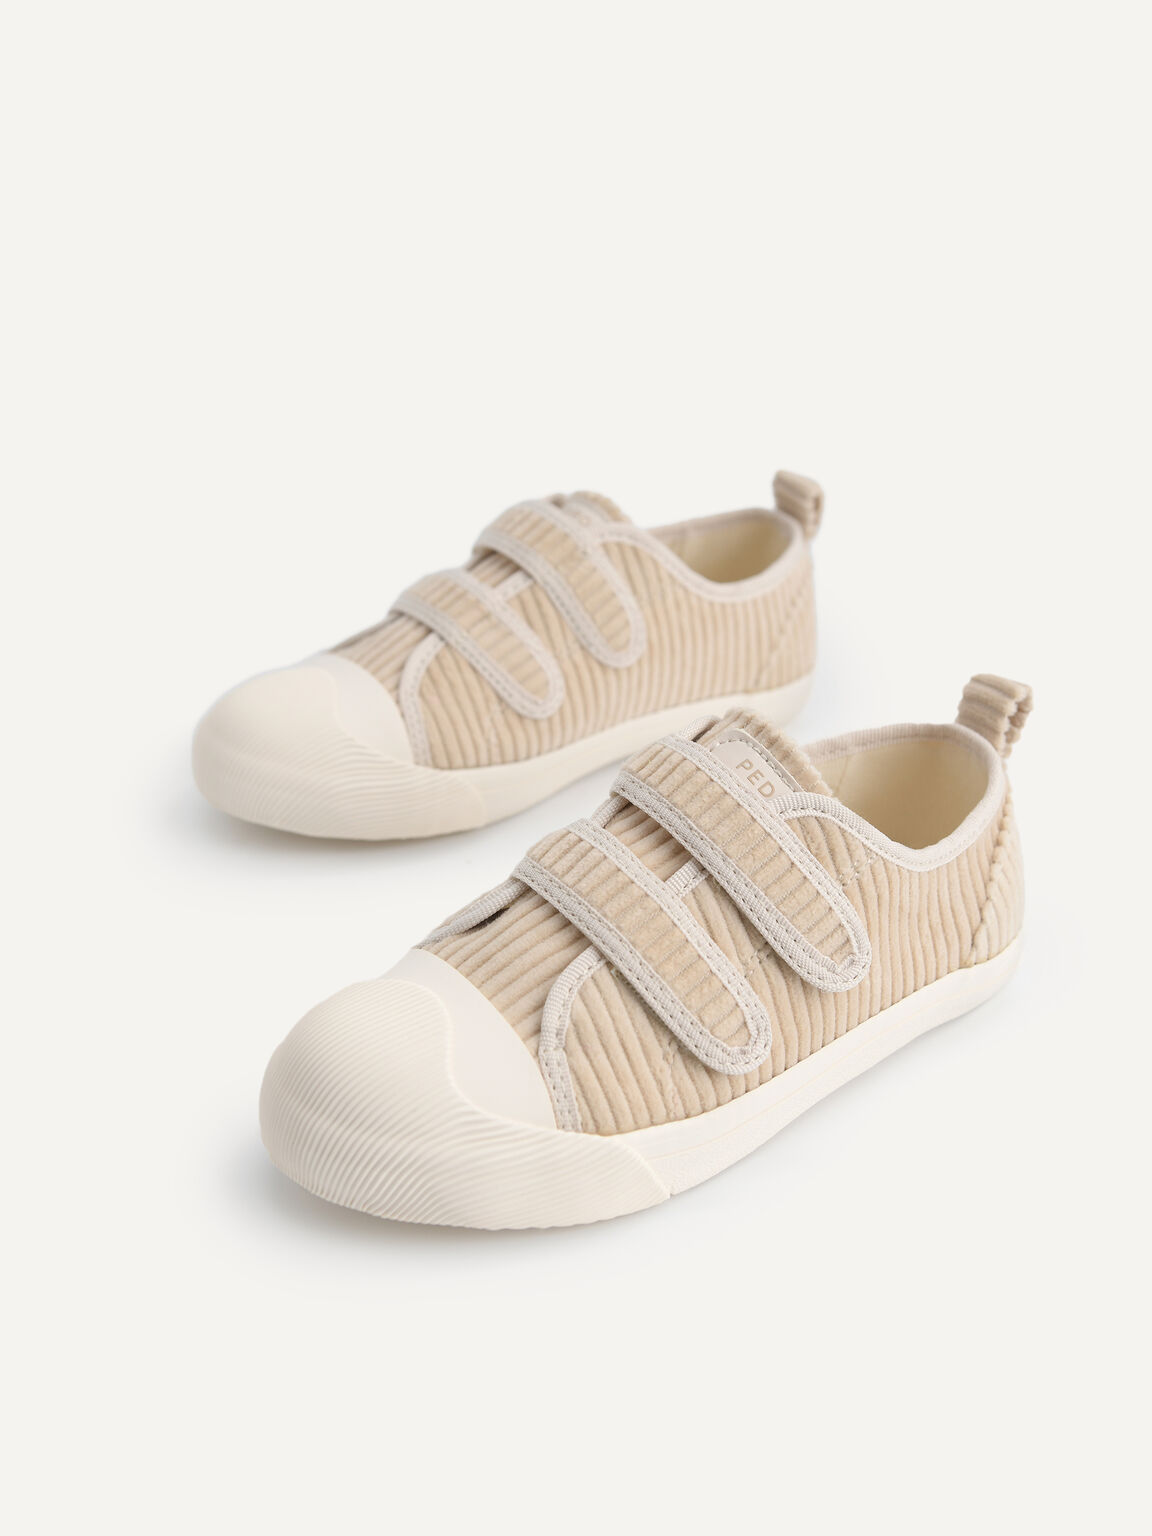 Corduroy Sneakers, Taupe, hi-res